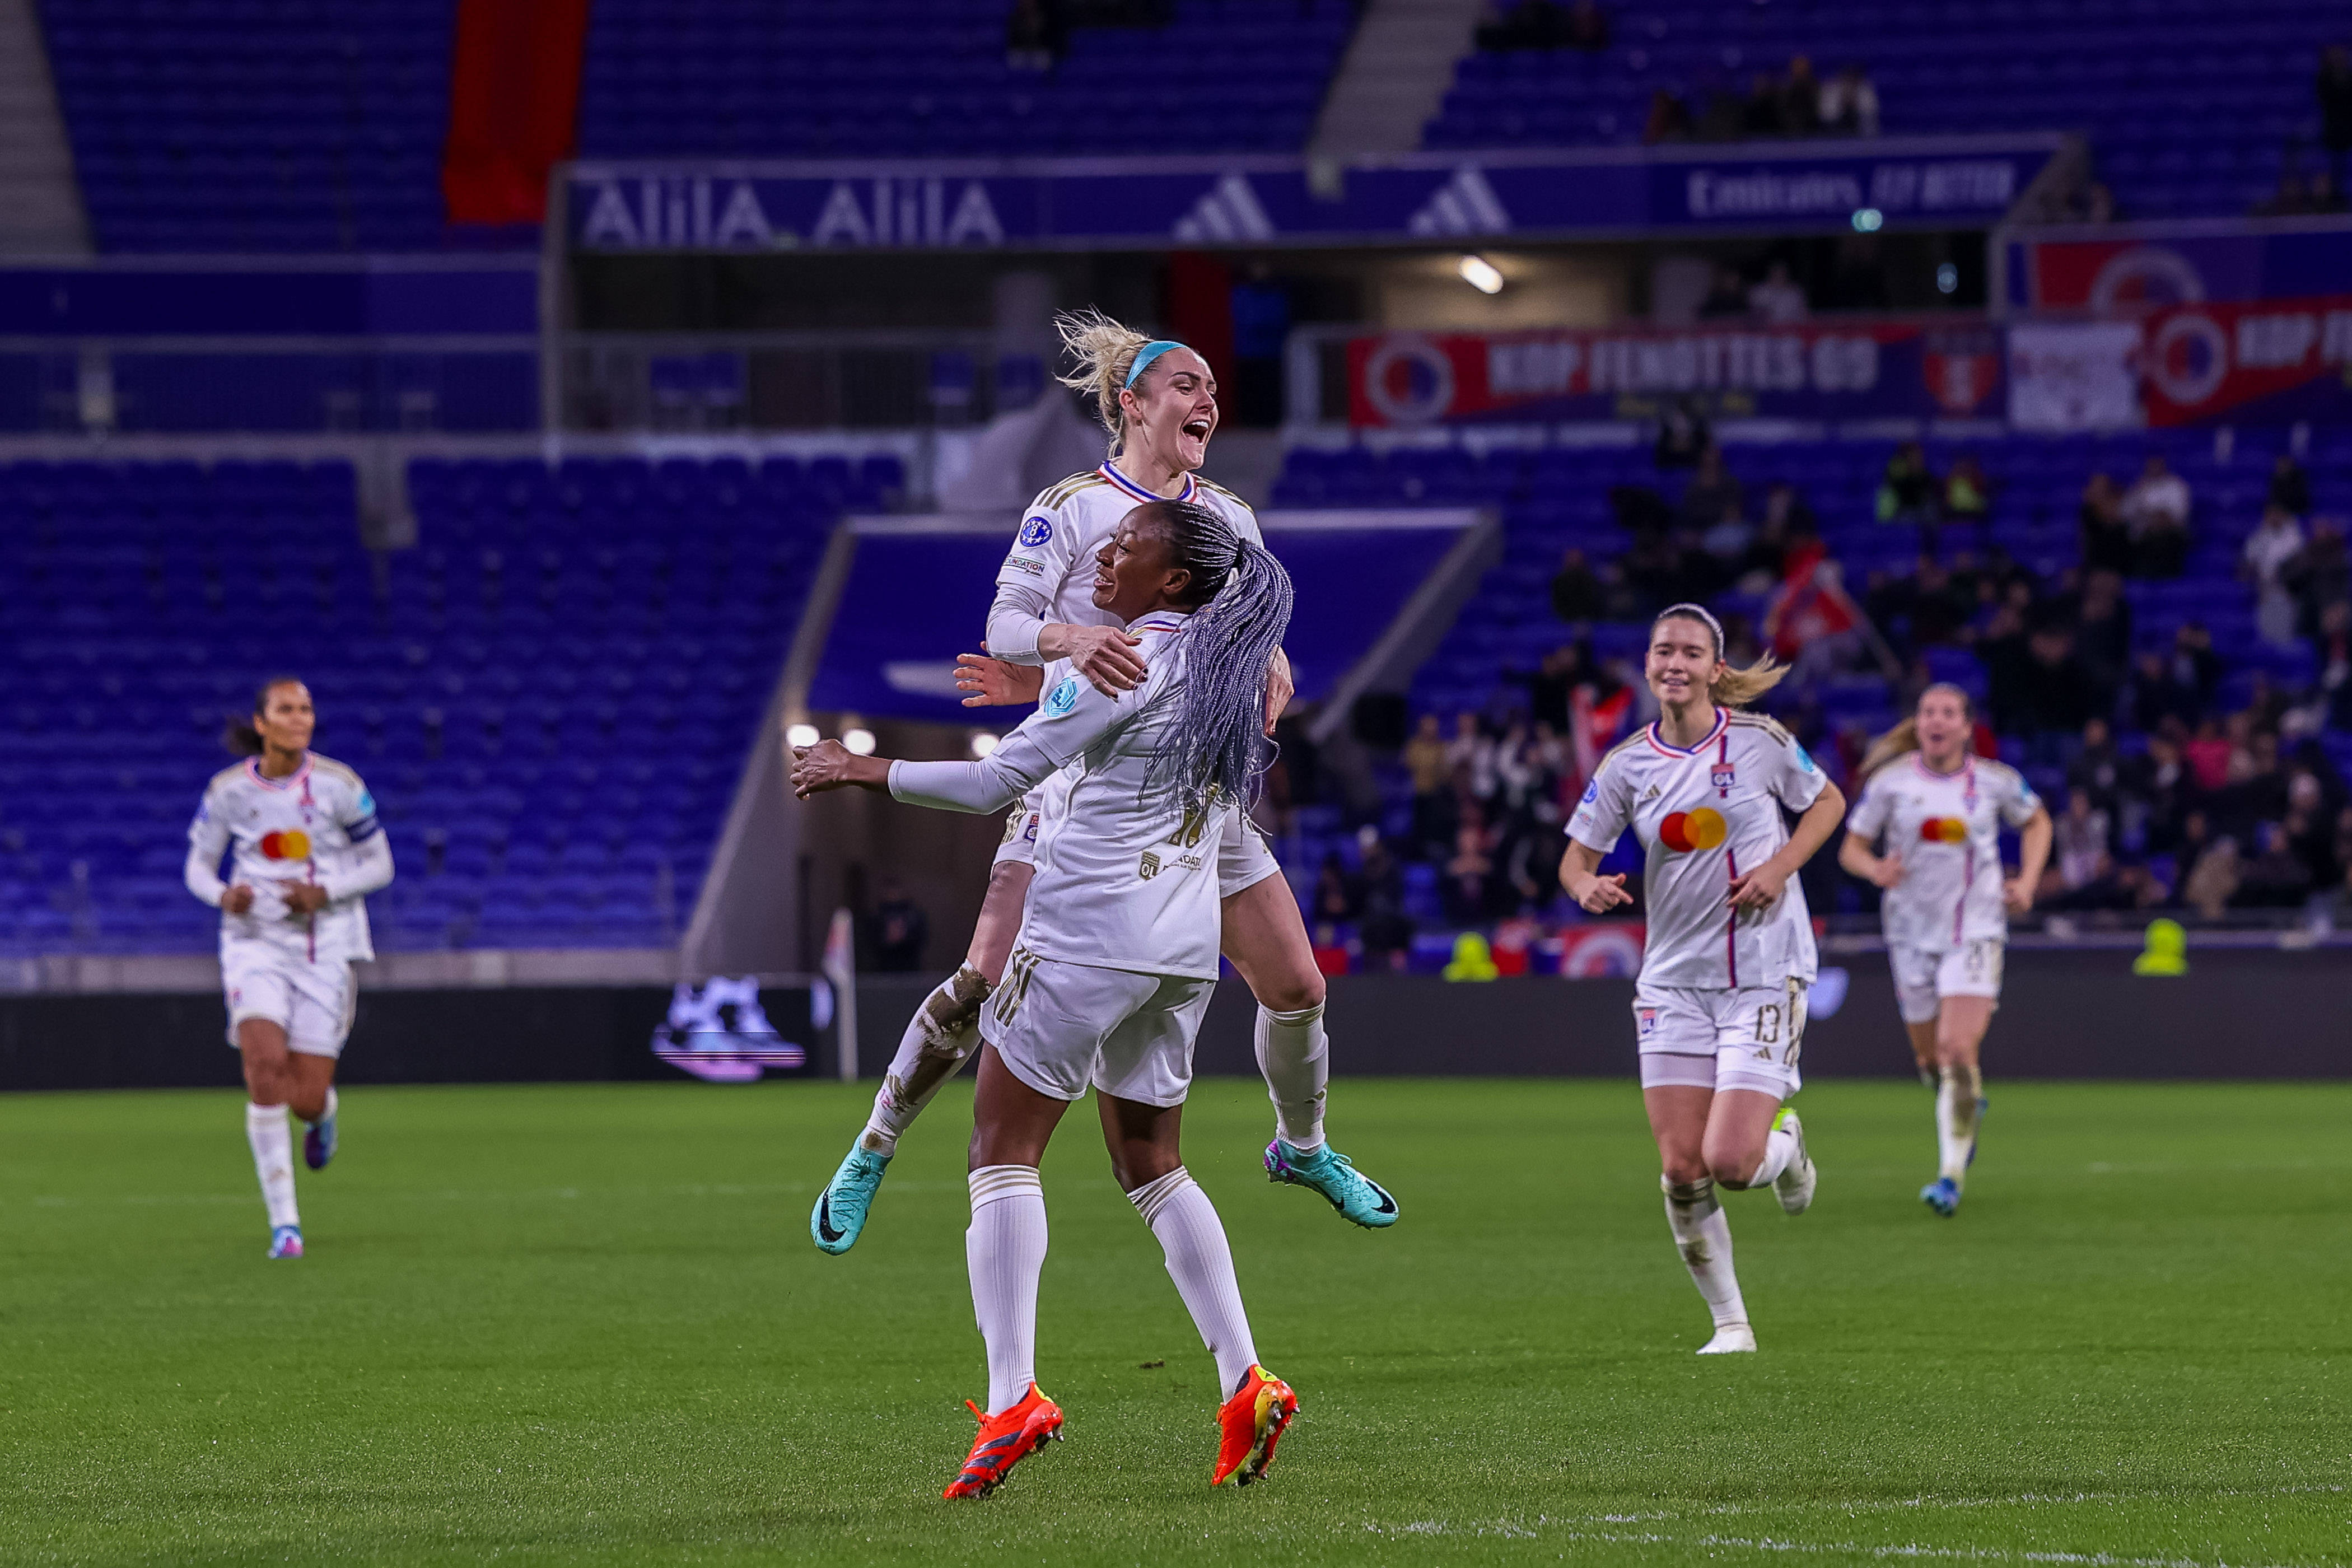 Kadidiatou Diani (11) from OL celebrating her goal with Ellie Carpenter (12) from OL during the UEFA Women s Champions League game between Olympique Lyonnais and SK Brann at Groupama Stadium in DÃ cines-Charpieu, France. (Pauline FIGUET / SPP)